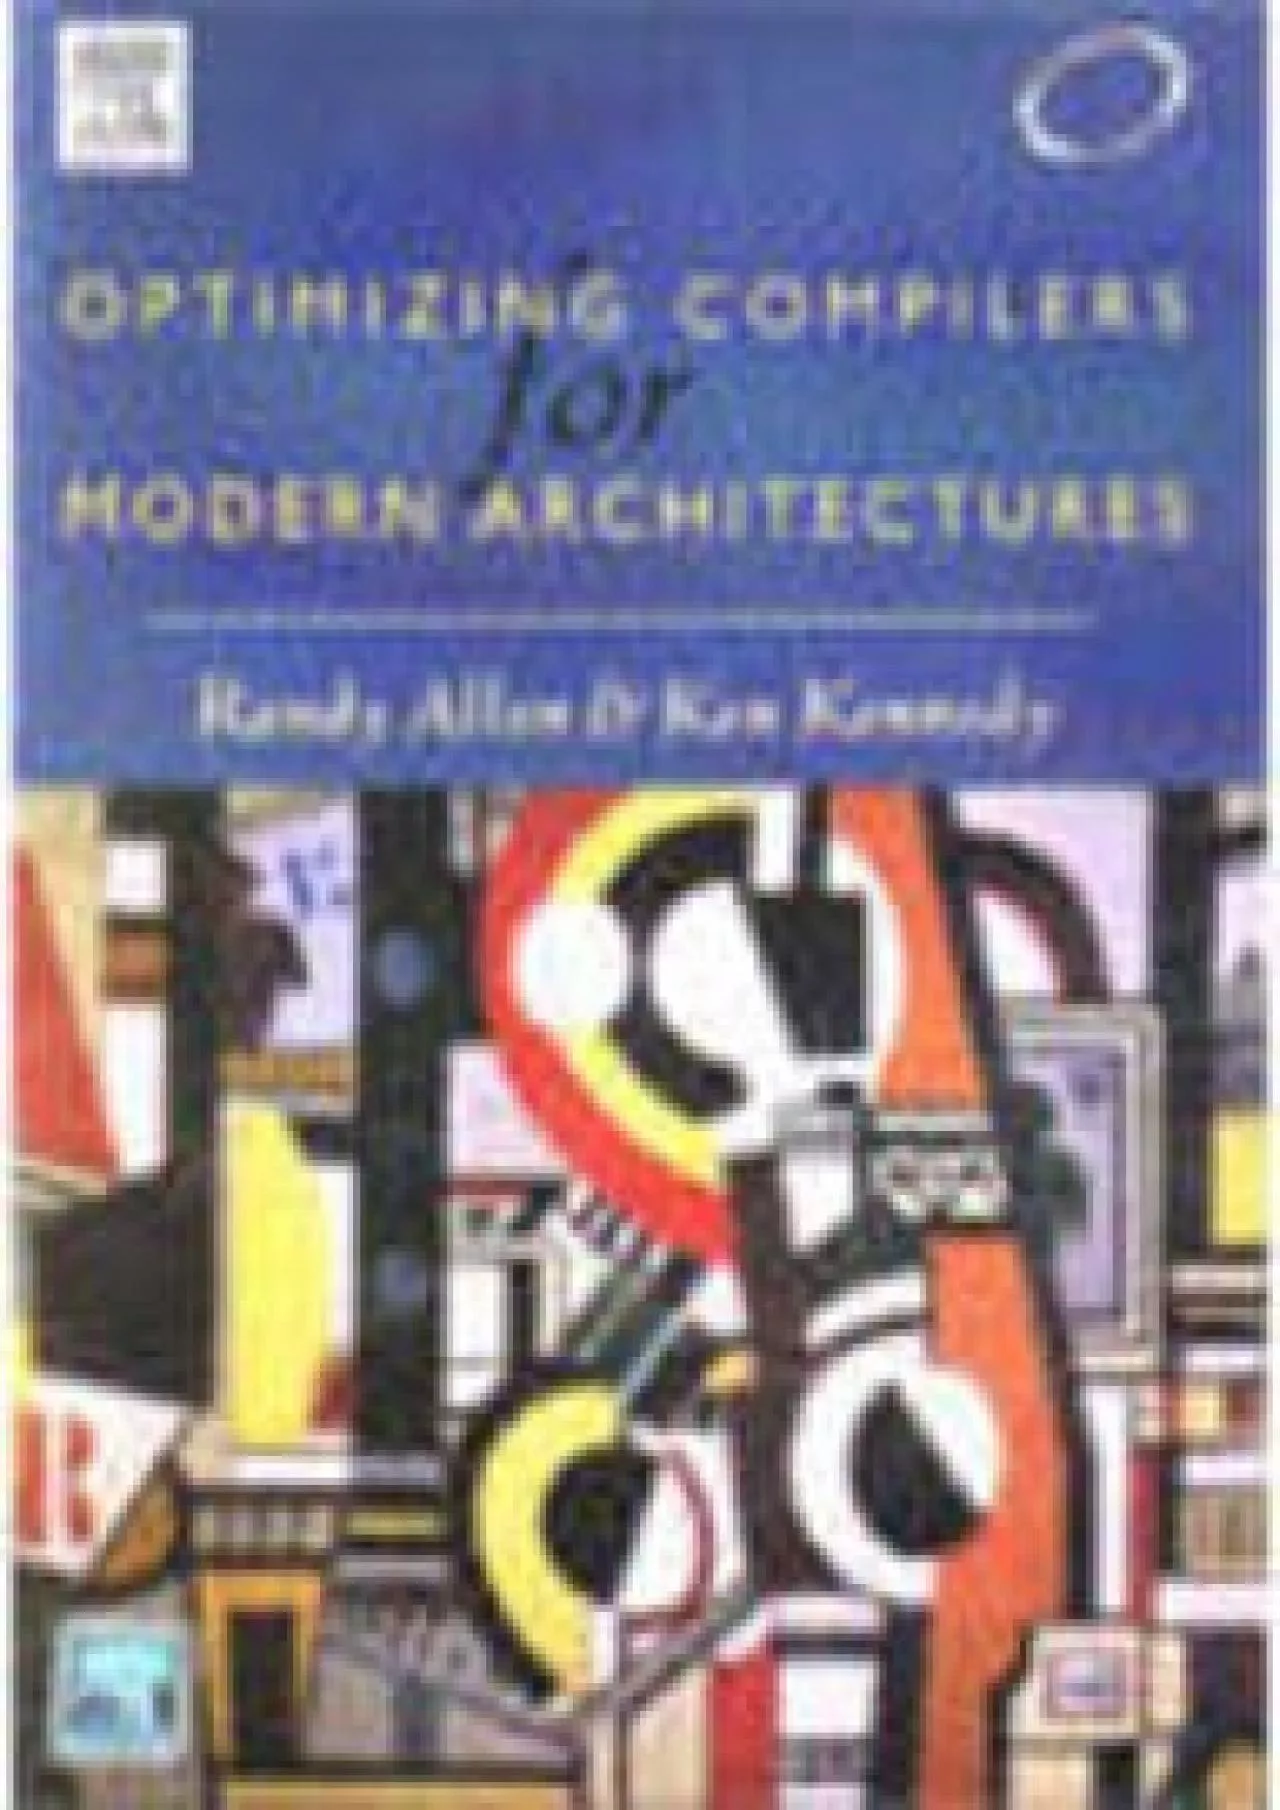 [PDF]-Optimizing Compilers for Modern Architectures